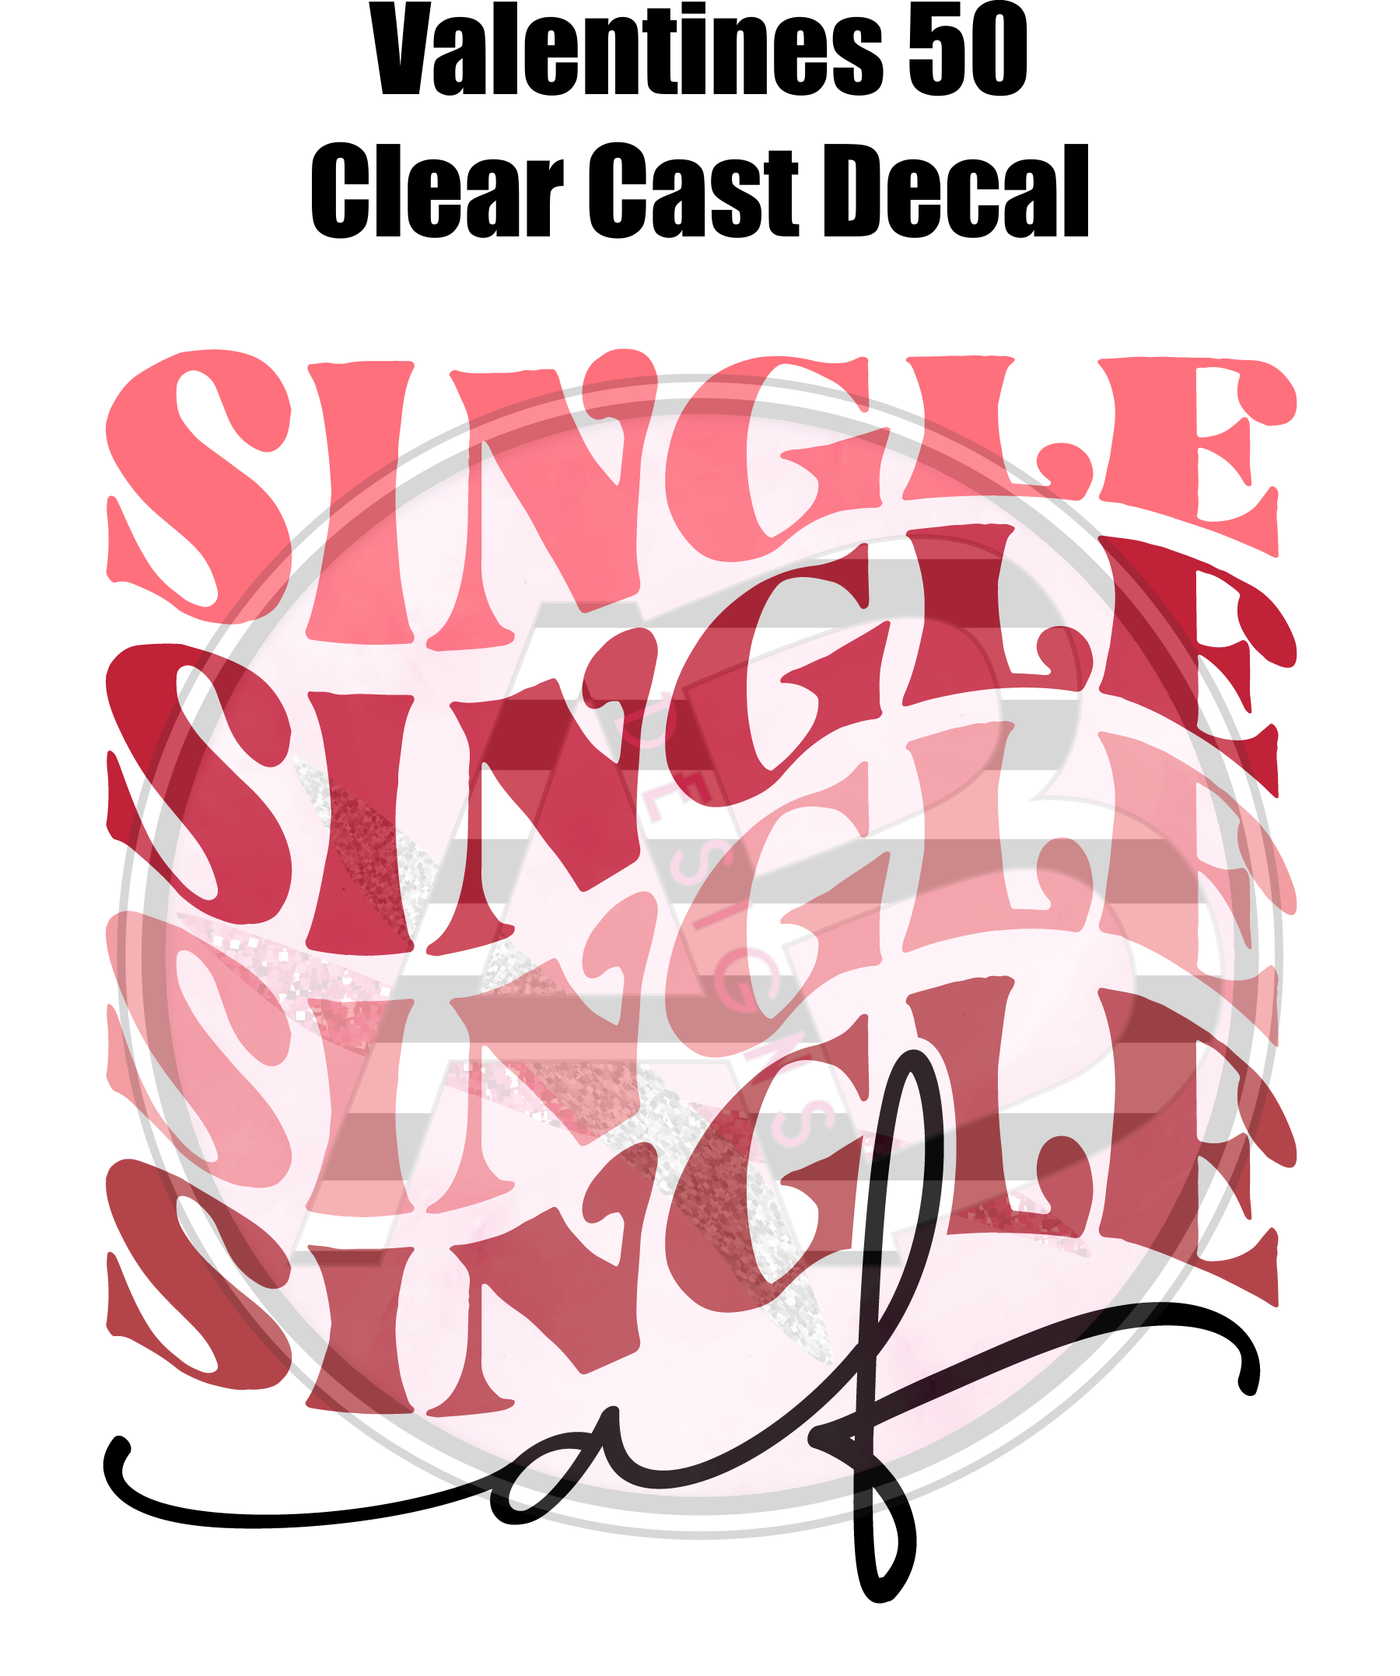 Valentines 50 - Clear Cast Decal